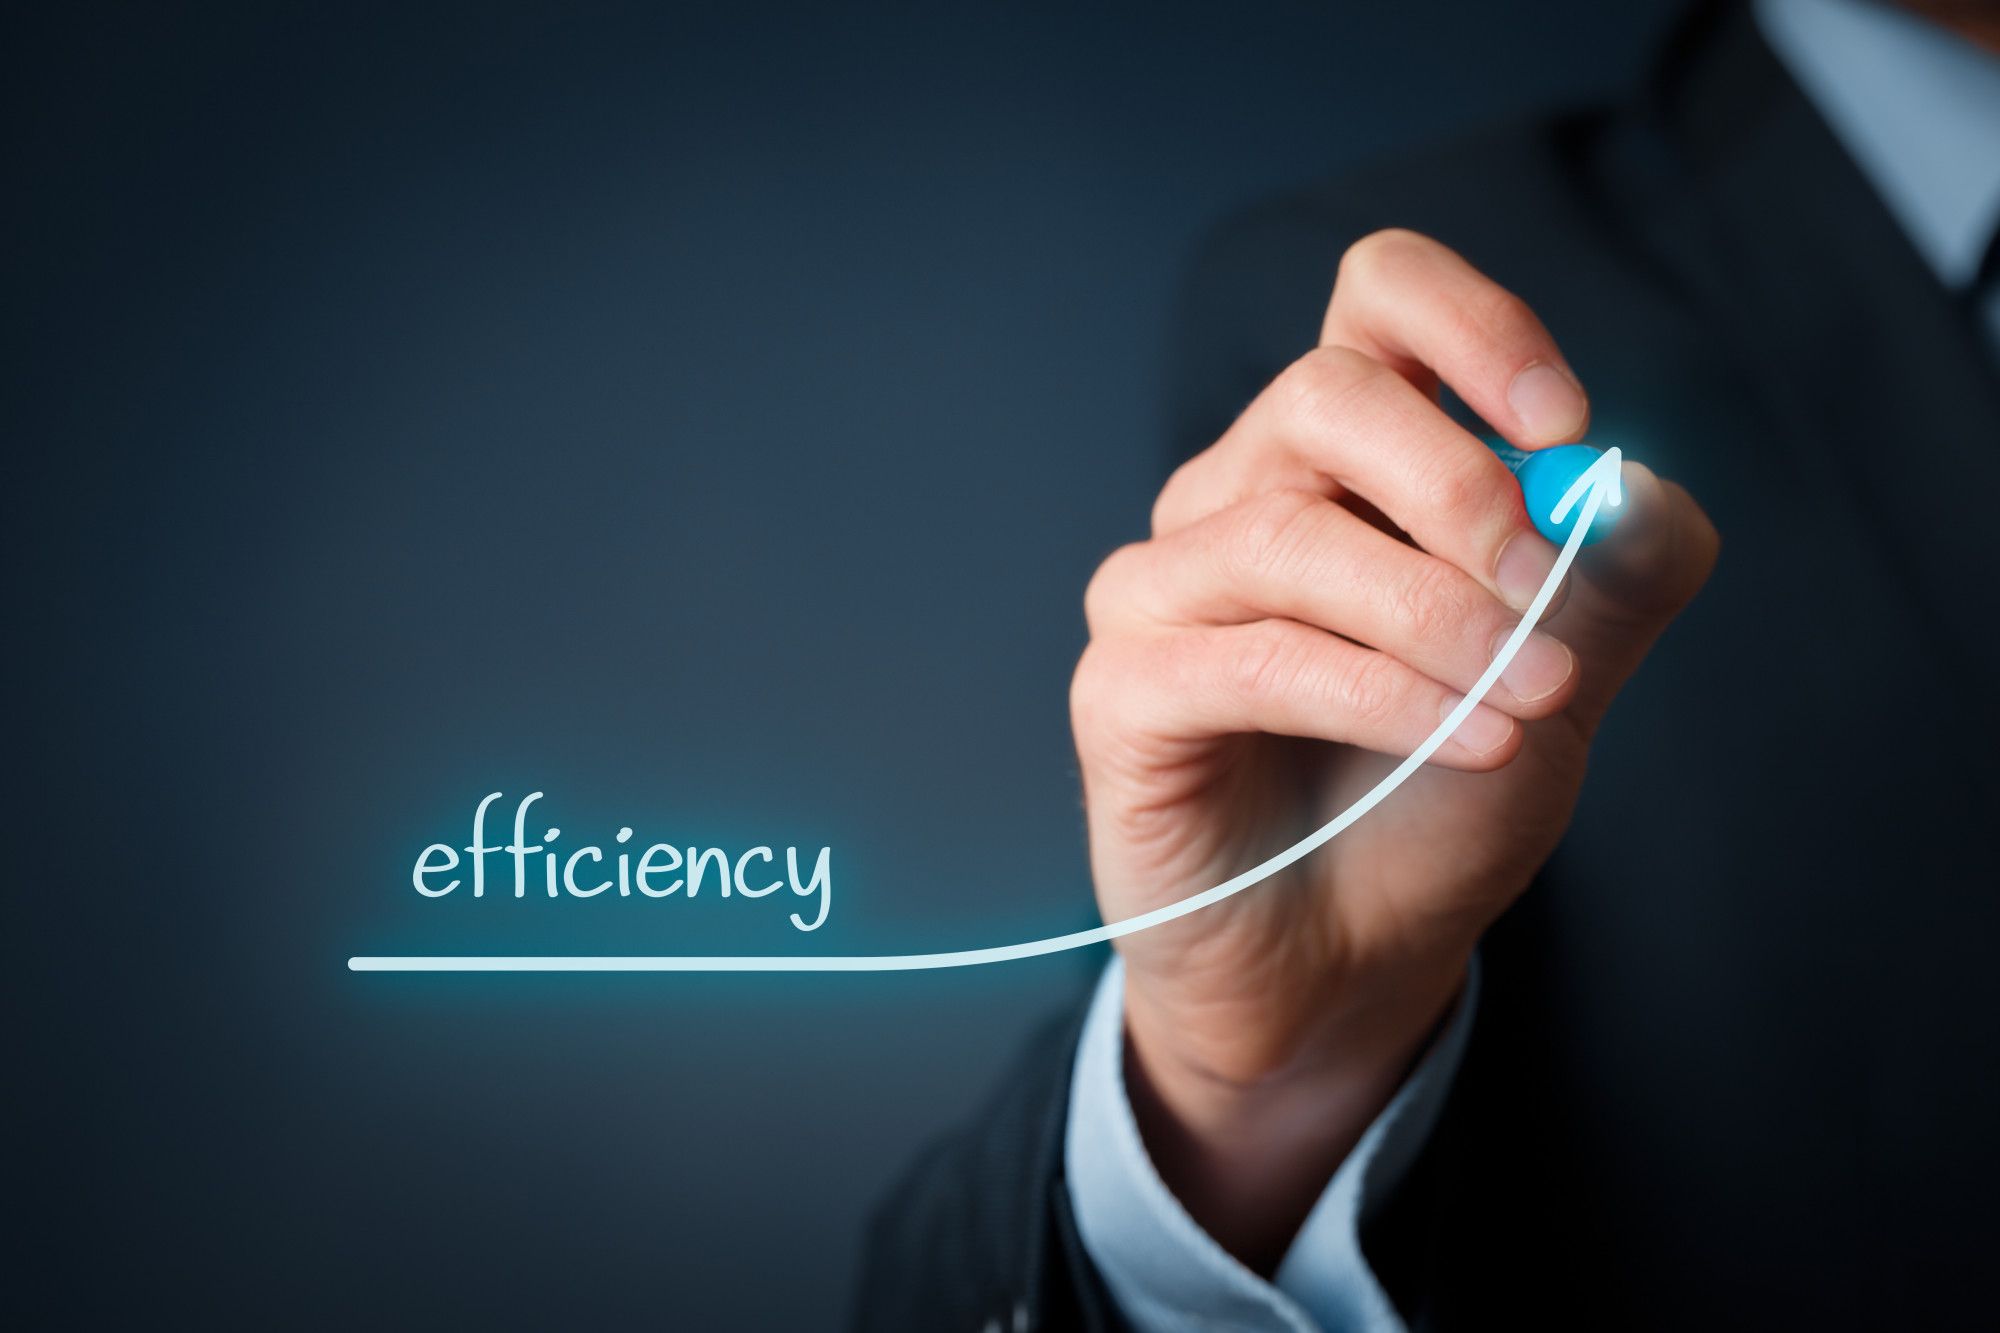 How to Improve Efficiency at Work